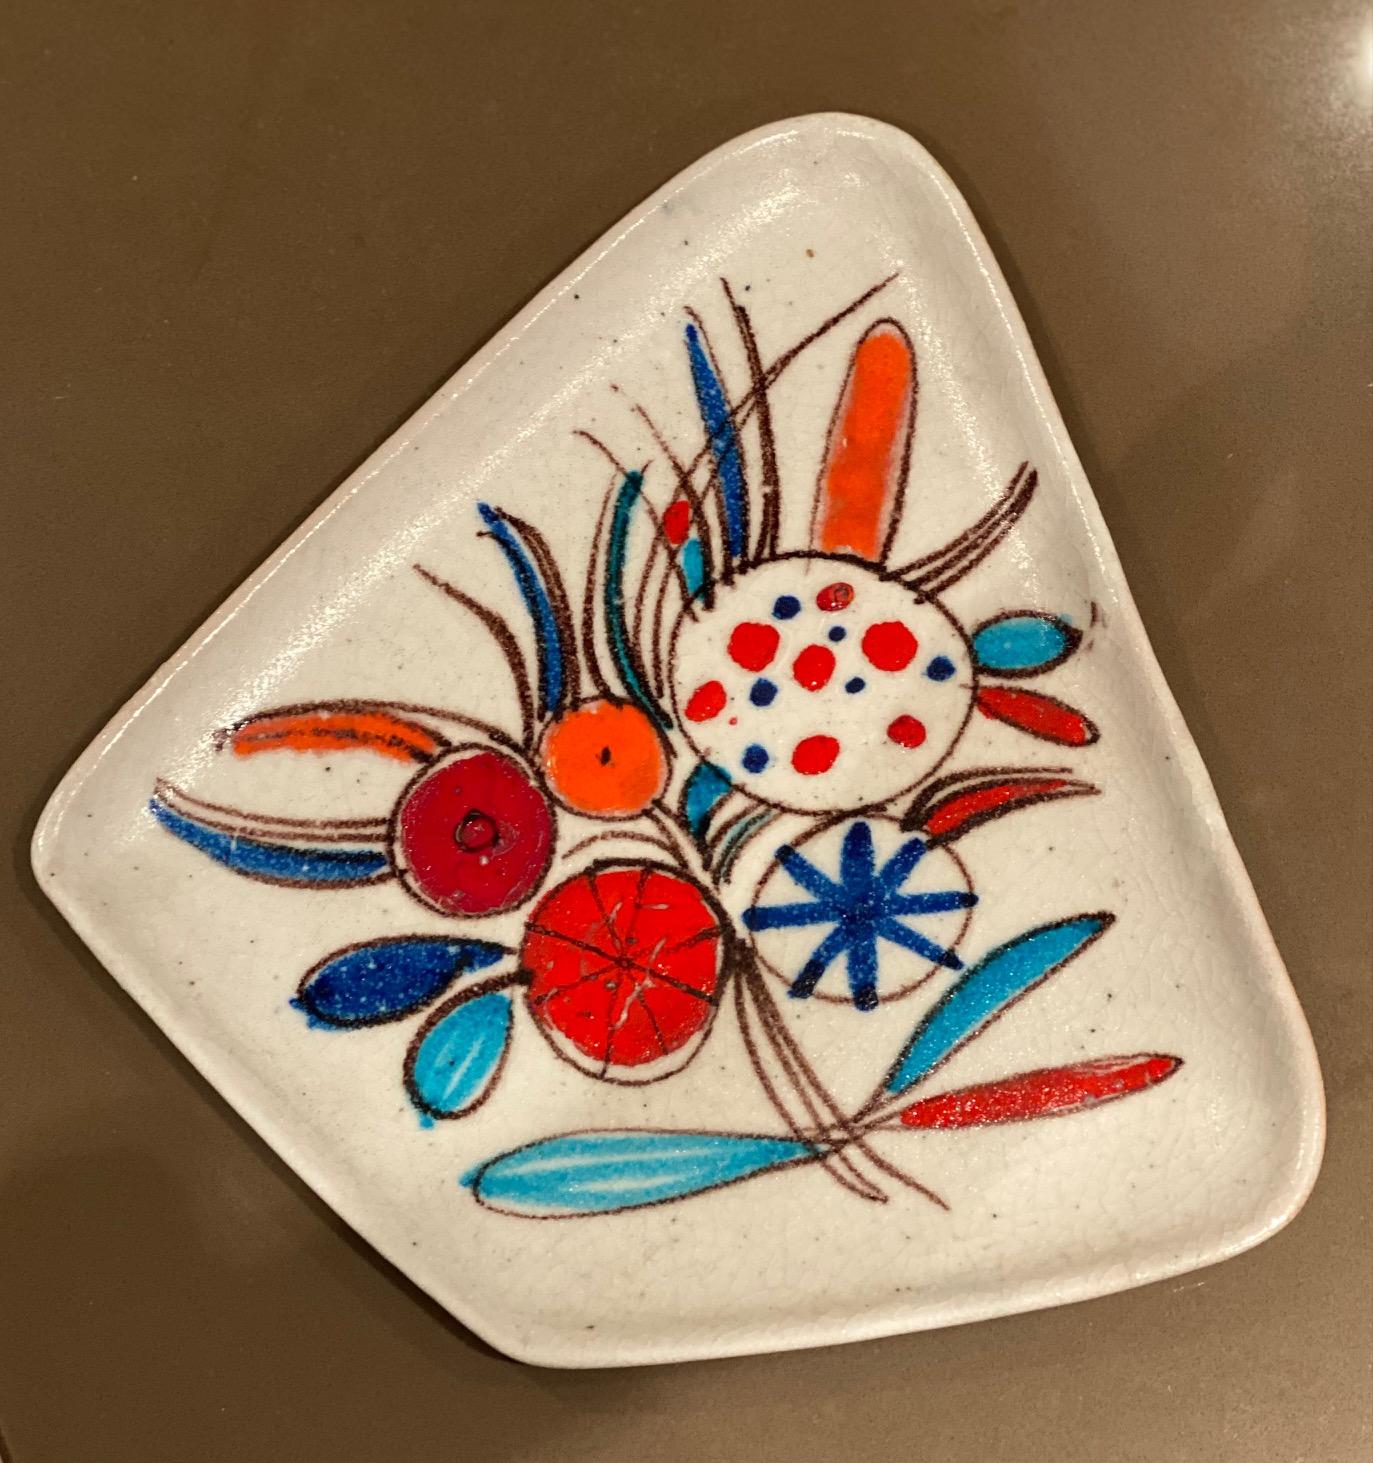 Guido Gambone (1909-1969)
Hand painted enameled flowers decor on white glazed ceramic.
Signed Gambone, Italy with donkey mark.
Guido Gambone was one of the best known leaders of the Italian midcentury modernist ceramics movement.
 